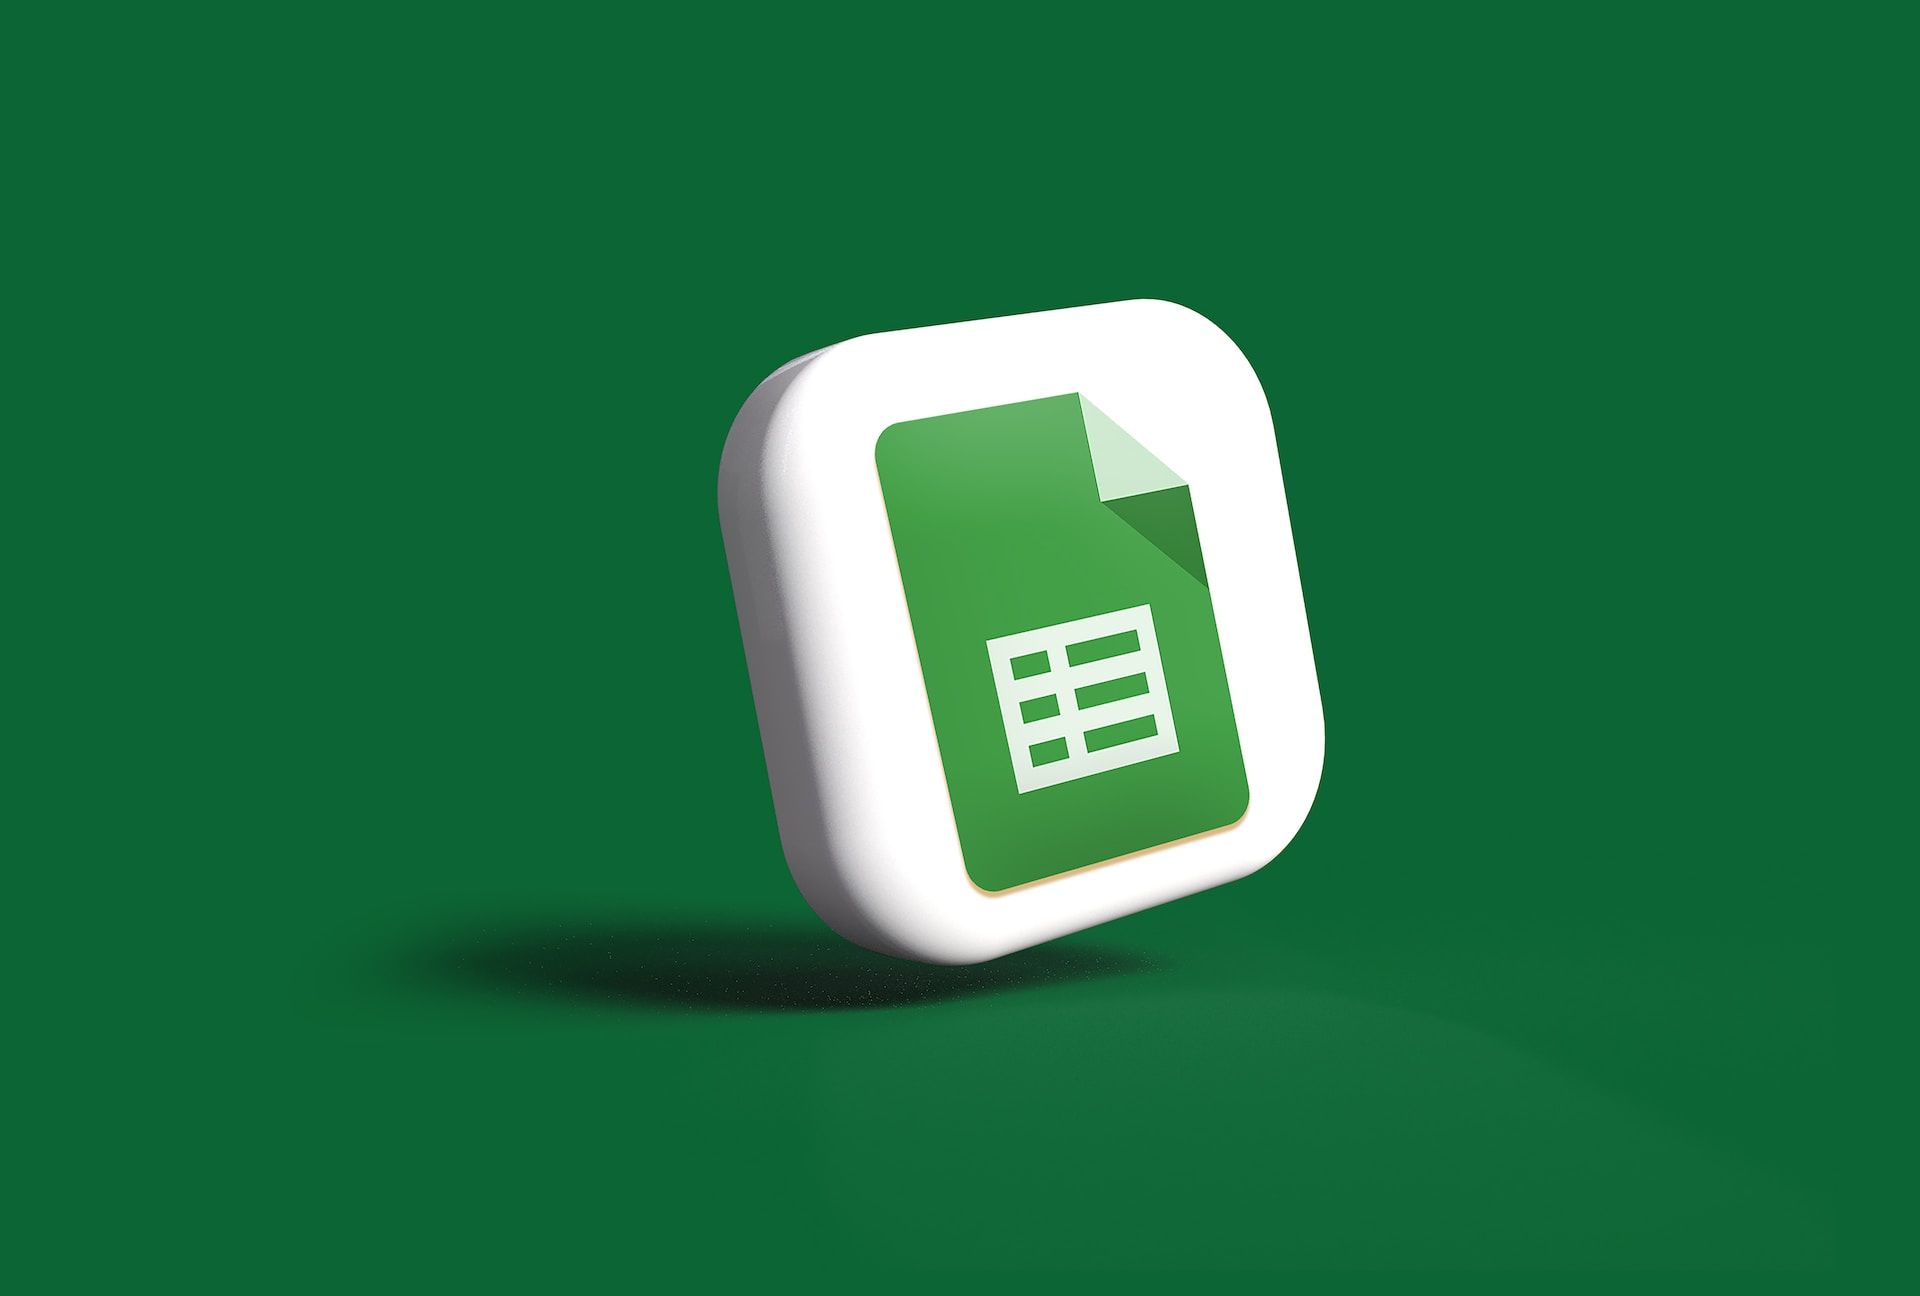 Google Sheets logo on a green background